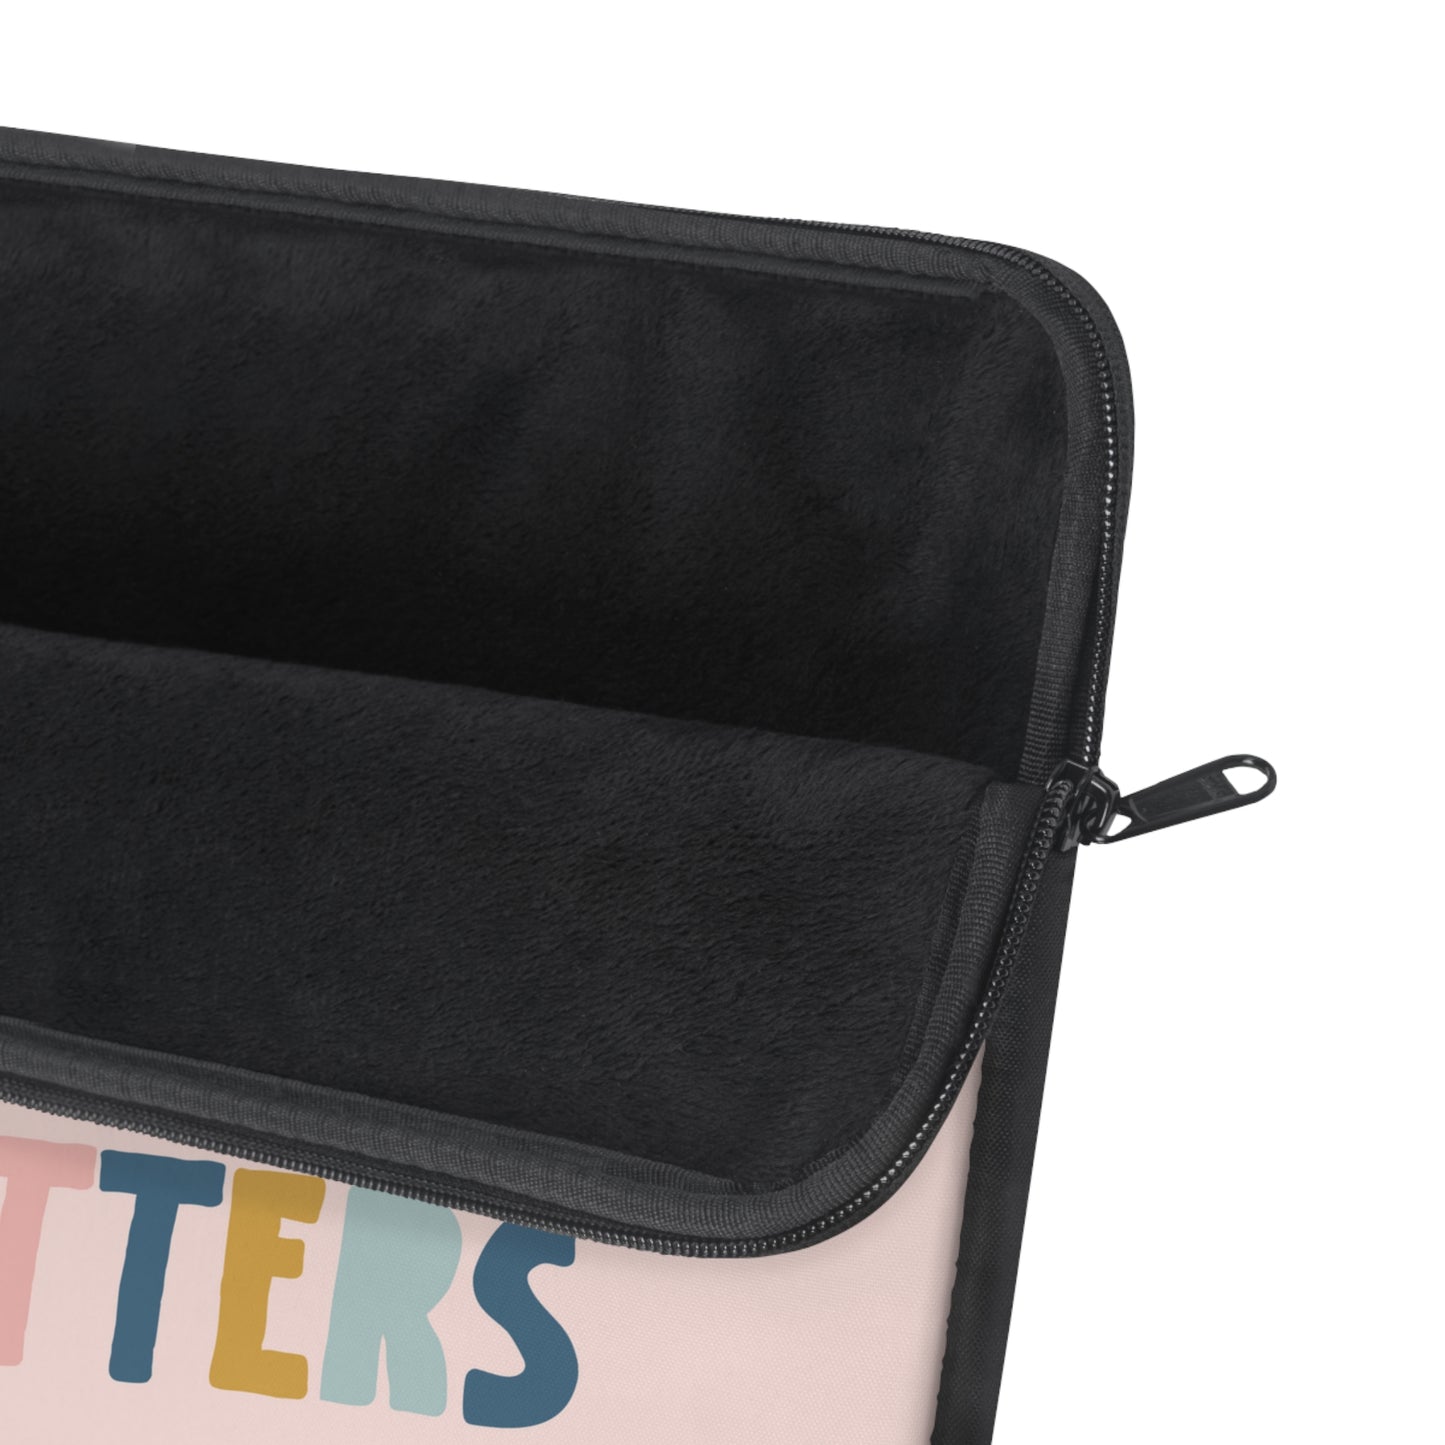 Inclusion Matters Laptop Sleeve